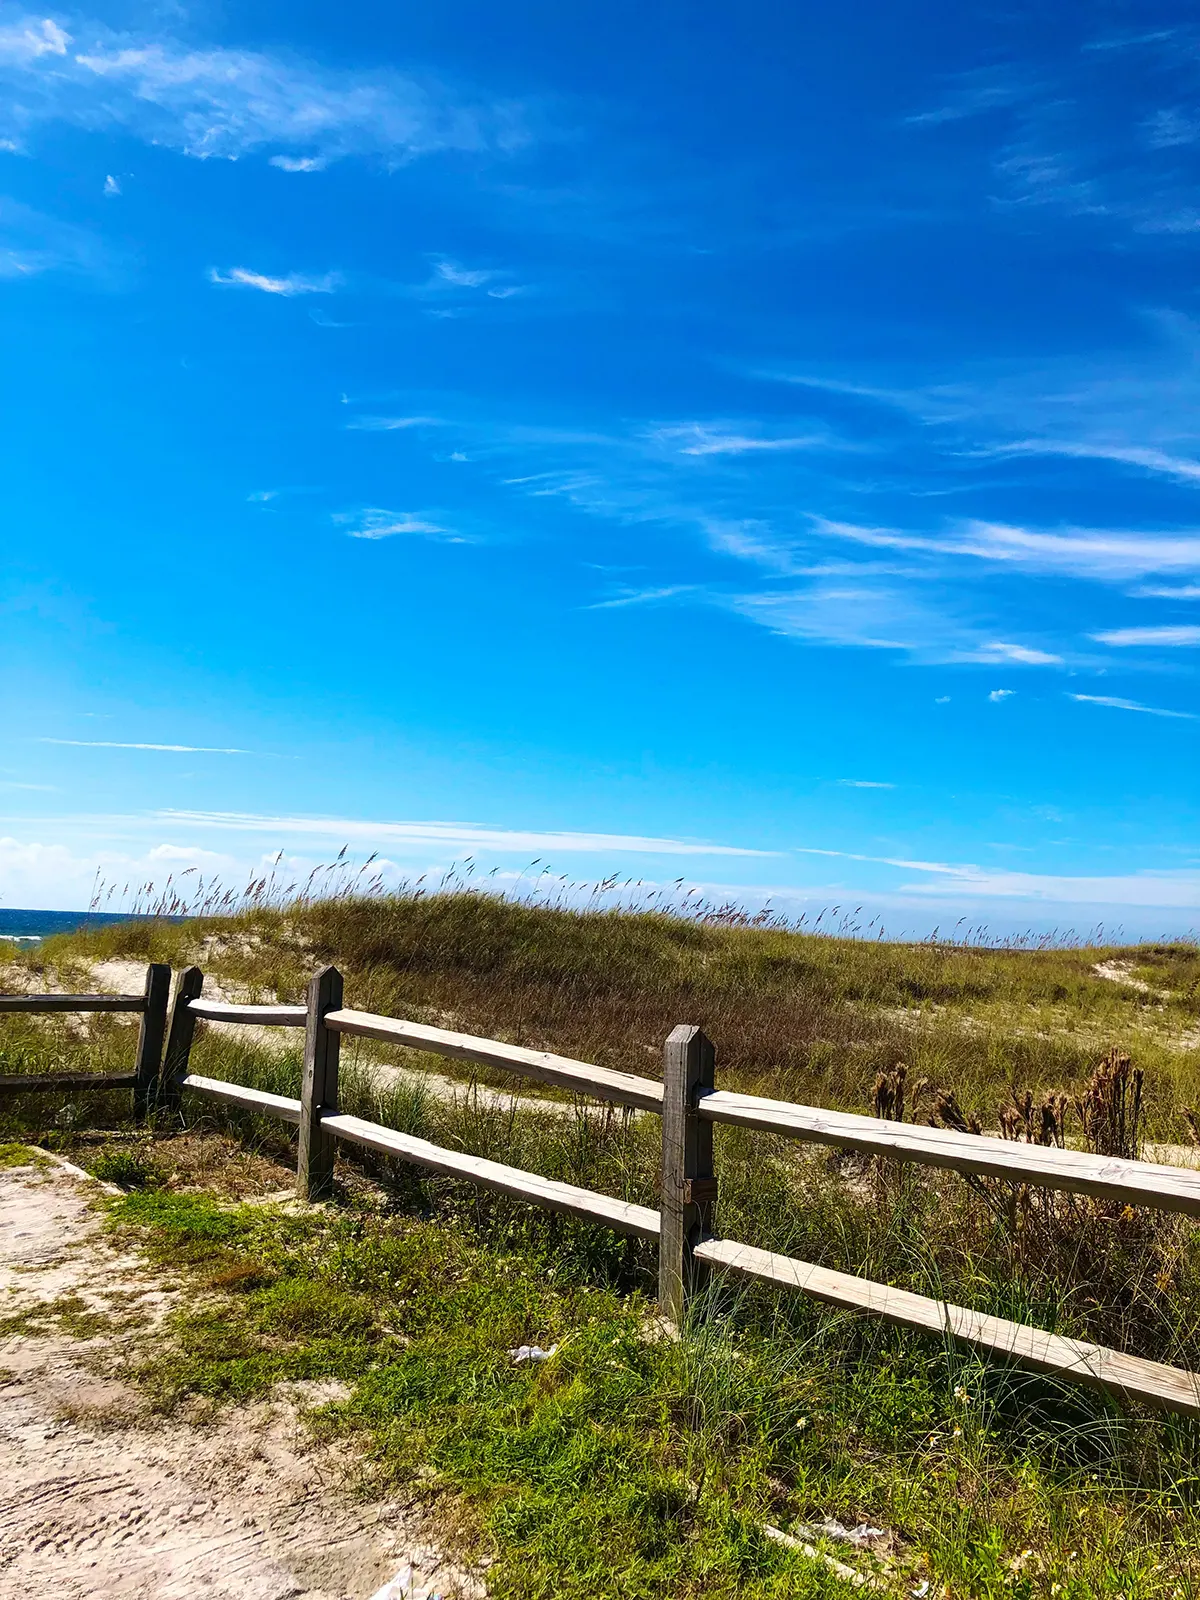 Fence, Grass, and Sand Dunes at the Beach | Air Conditioning Installation in Perdido Key | Emerald Coast Air Conditioning and Heating | AirConditioningRepairPensacola.com